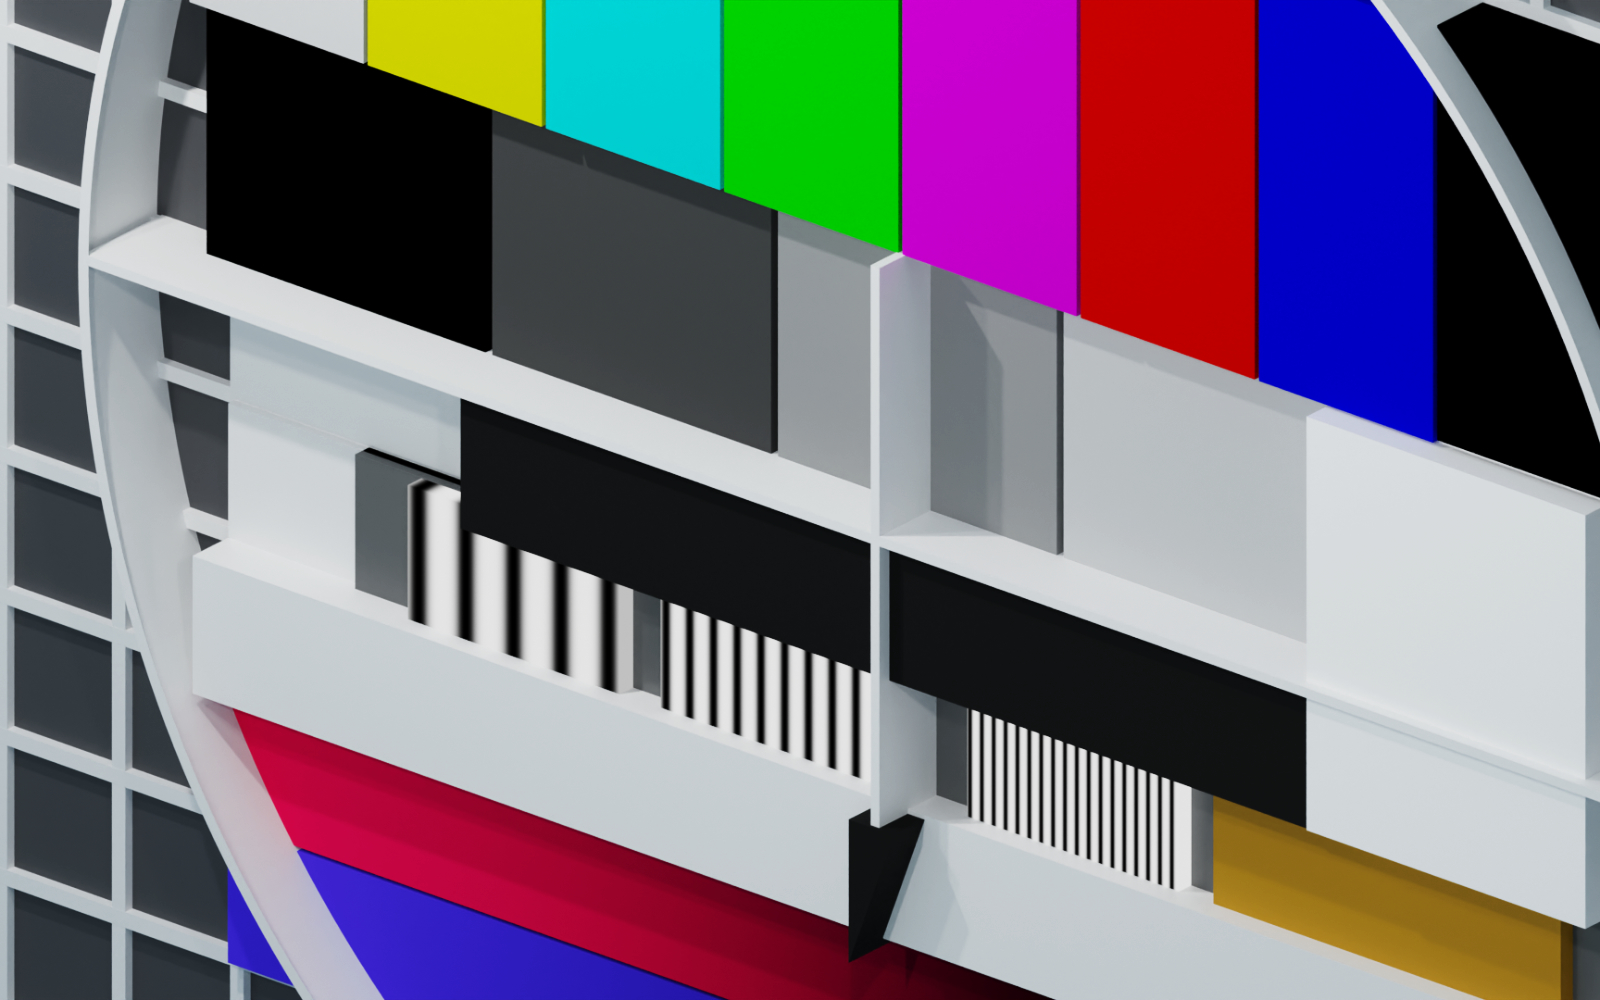 3D Art of a classic testcard used in german television throuhout the last century, here the 2D image is extended by one dimension